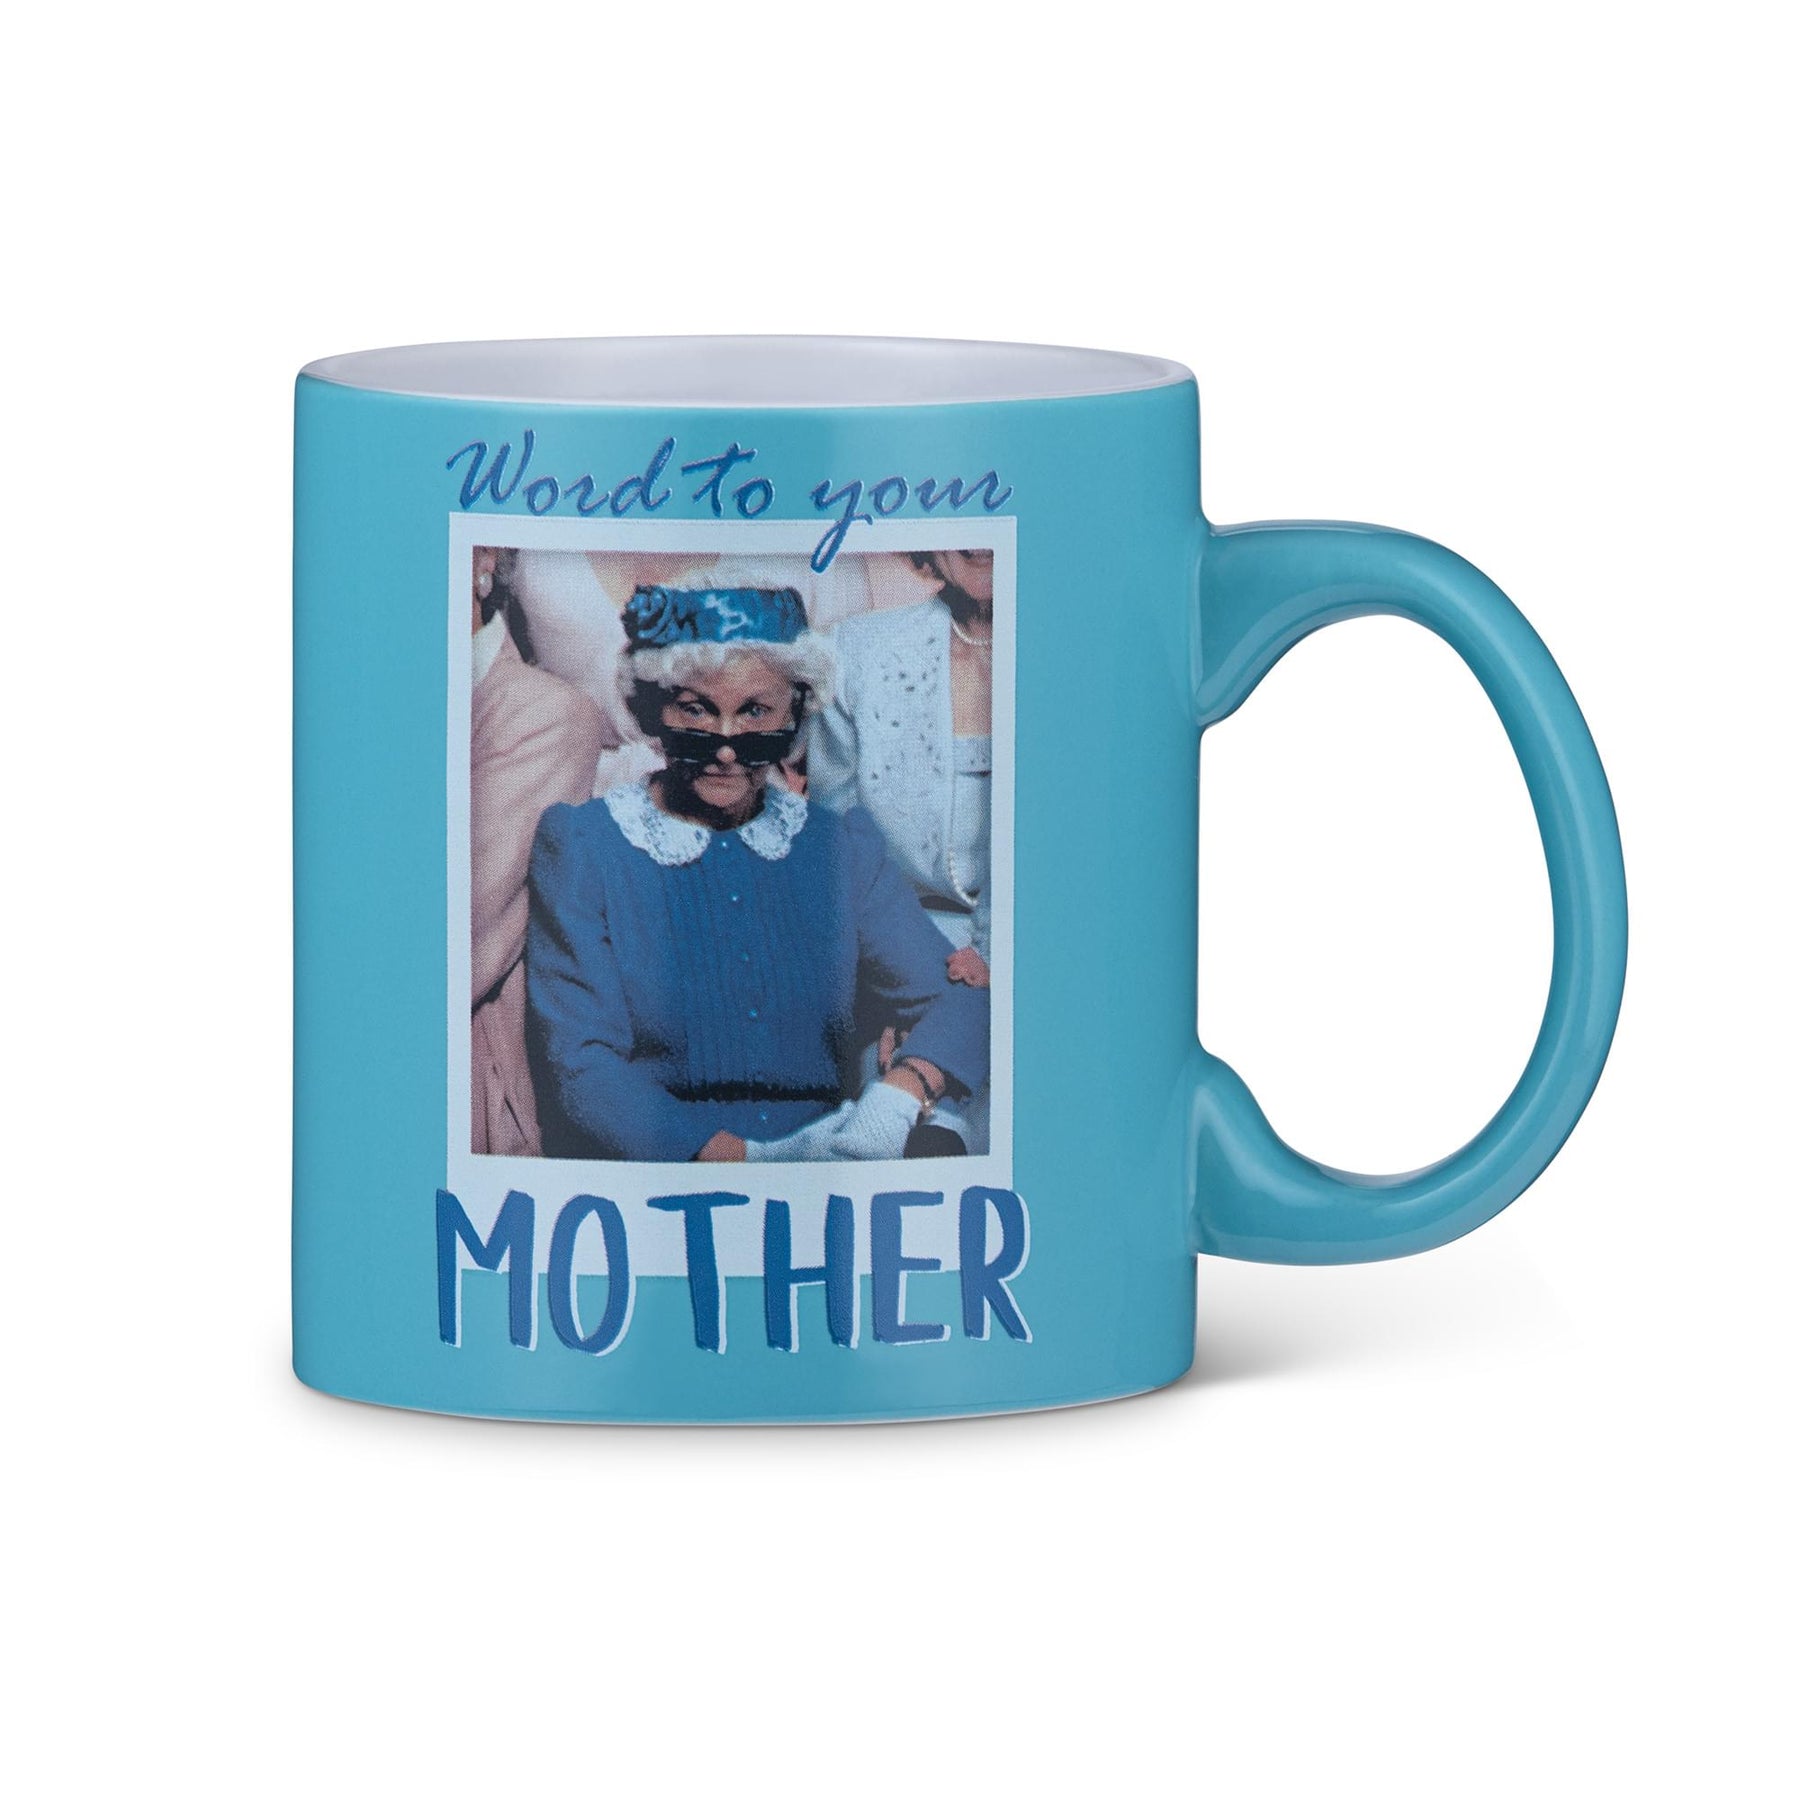 The Golden Girls Coffee Mug | Sophia Word To Your Mother | Holds 20 Ounces